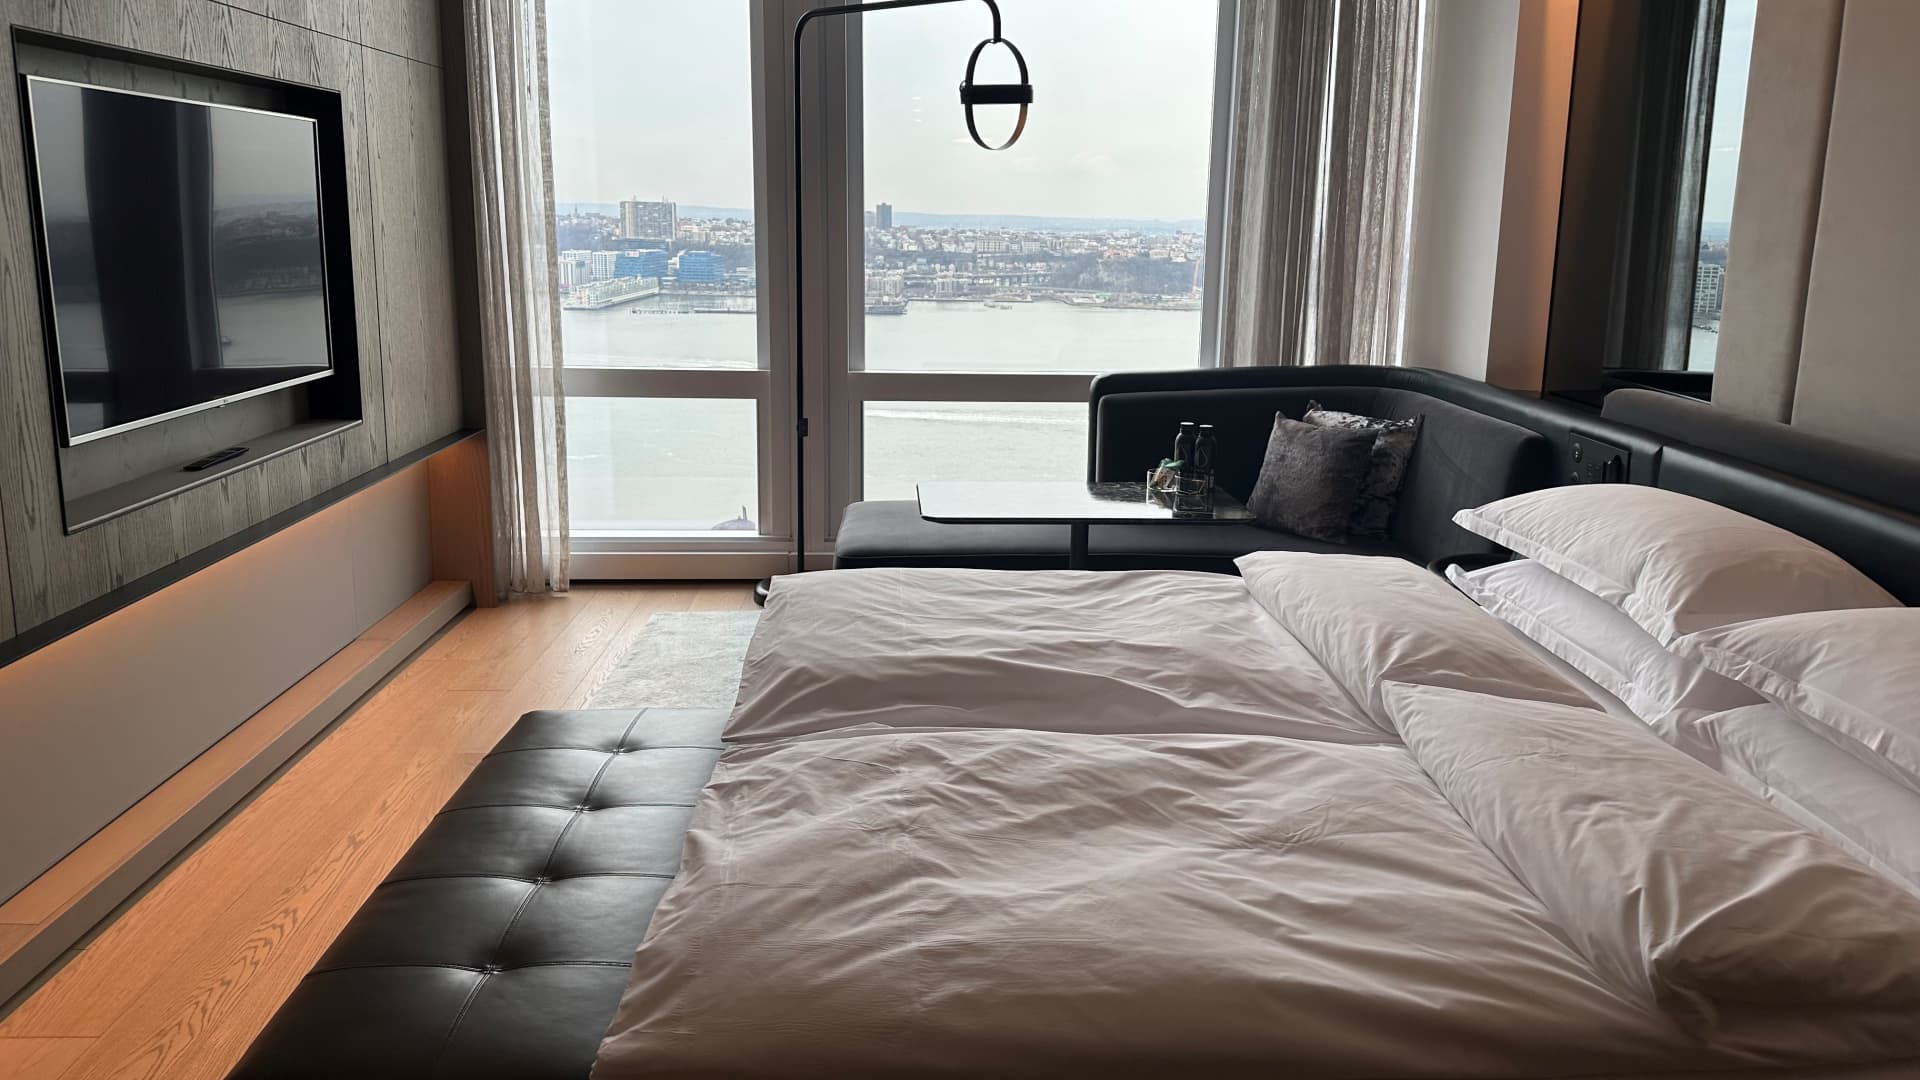 The hotel room at Equinox Hotel in Hudson Yards aims to improve your sleep experience.